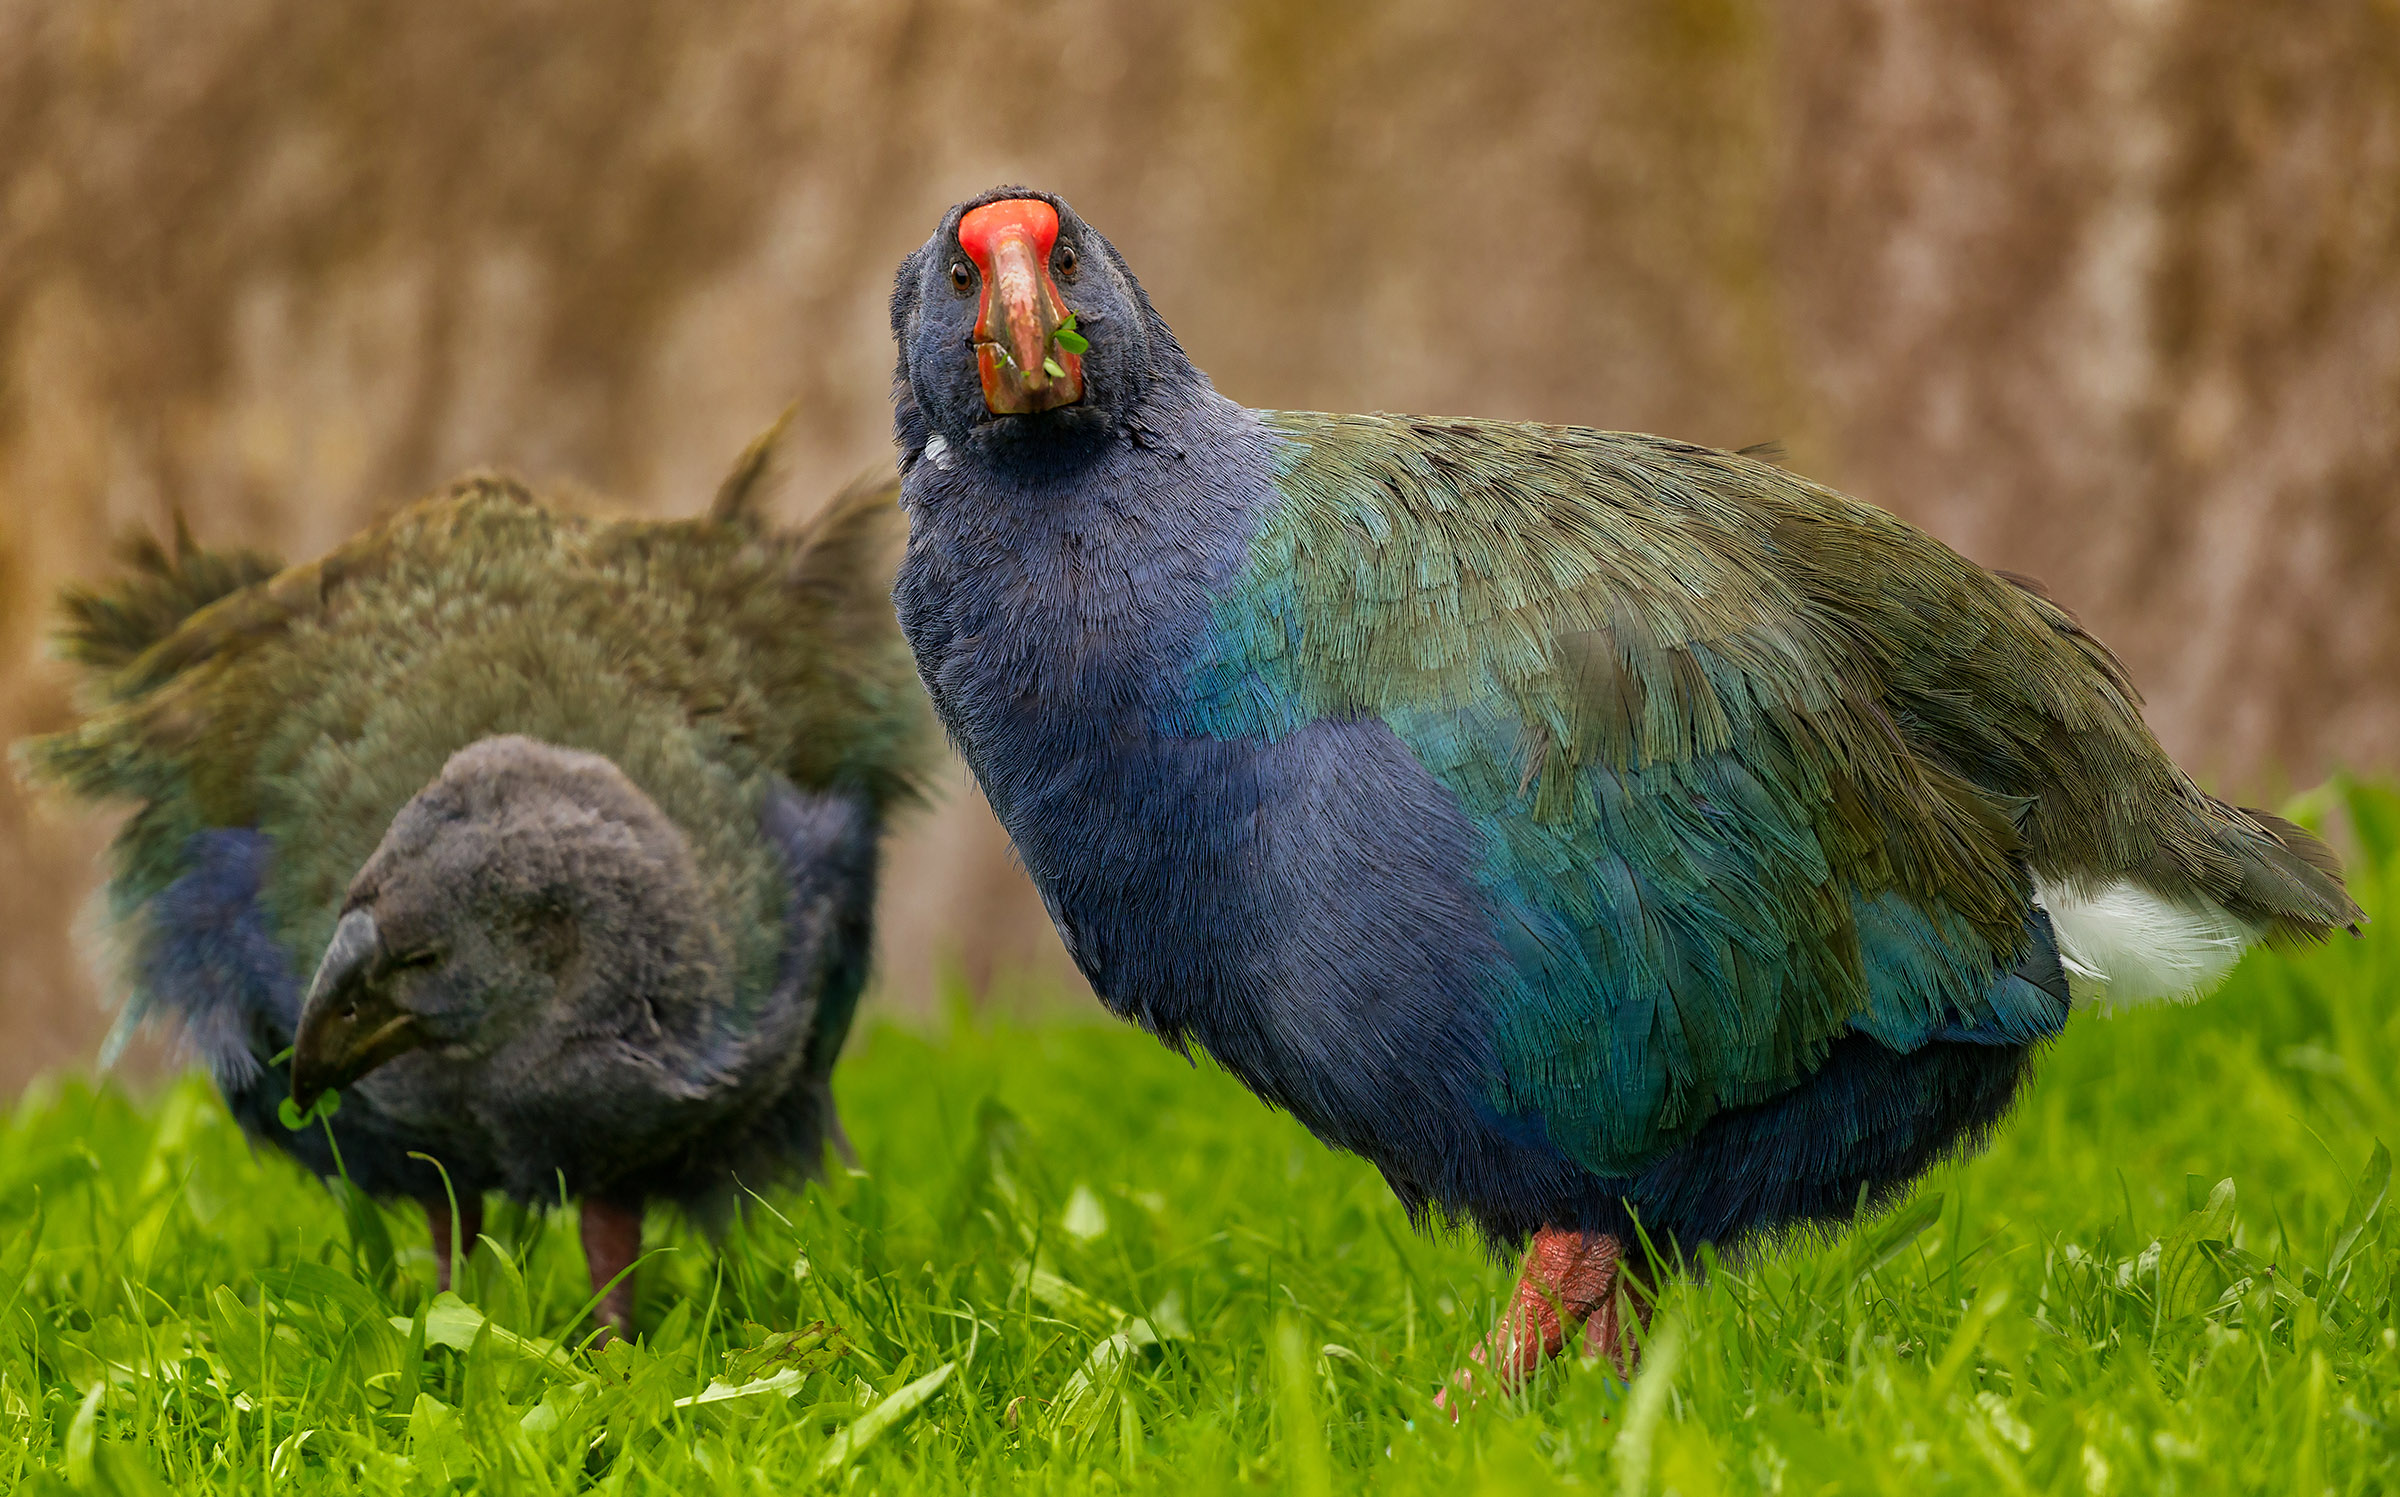 Prehistoric Takahe birds were thought to be extinct, but theyâve returned to the wild